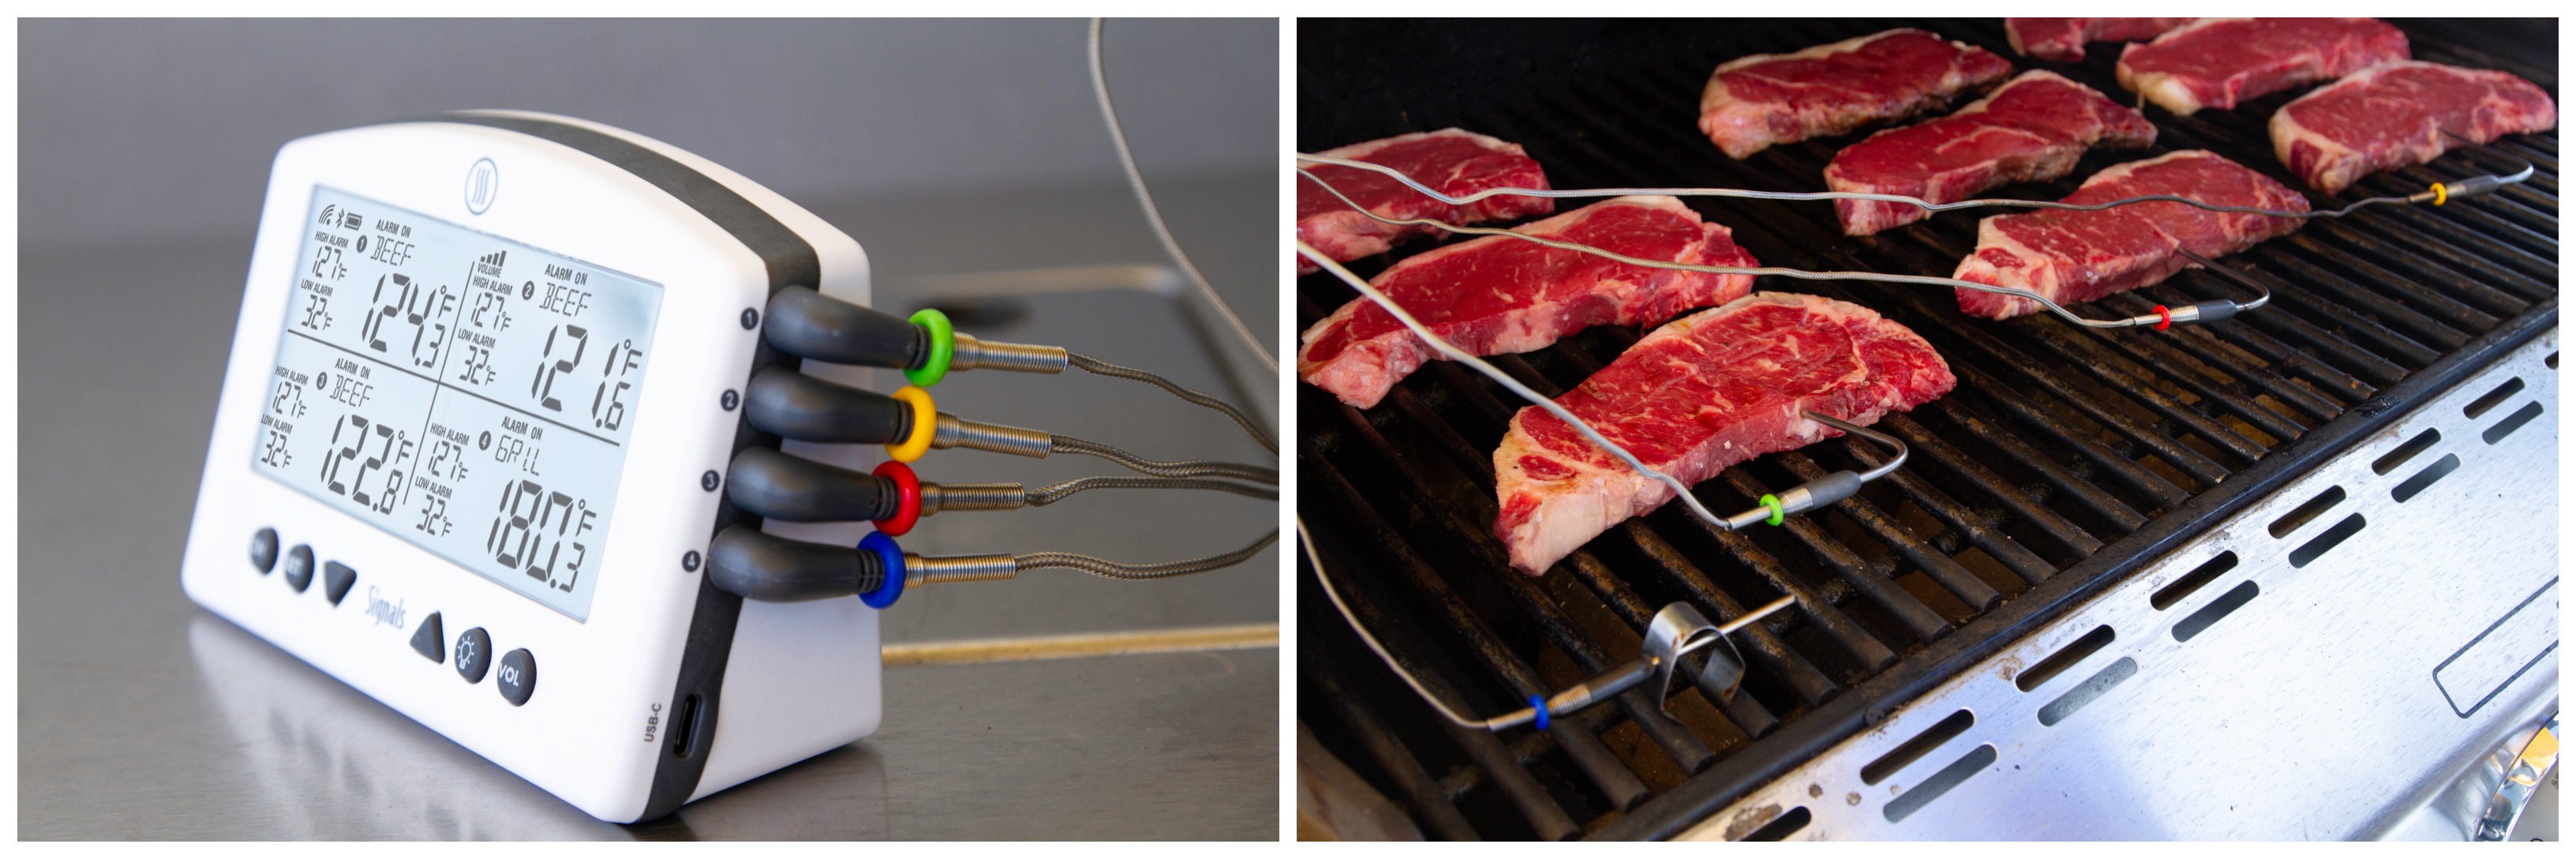 Enhance your grilling experience with a thermometer